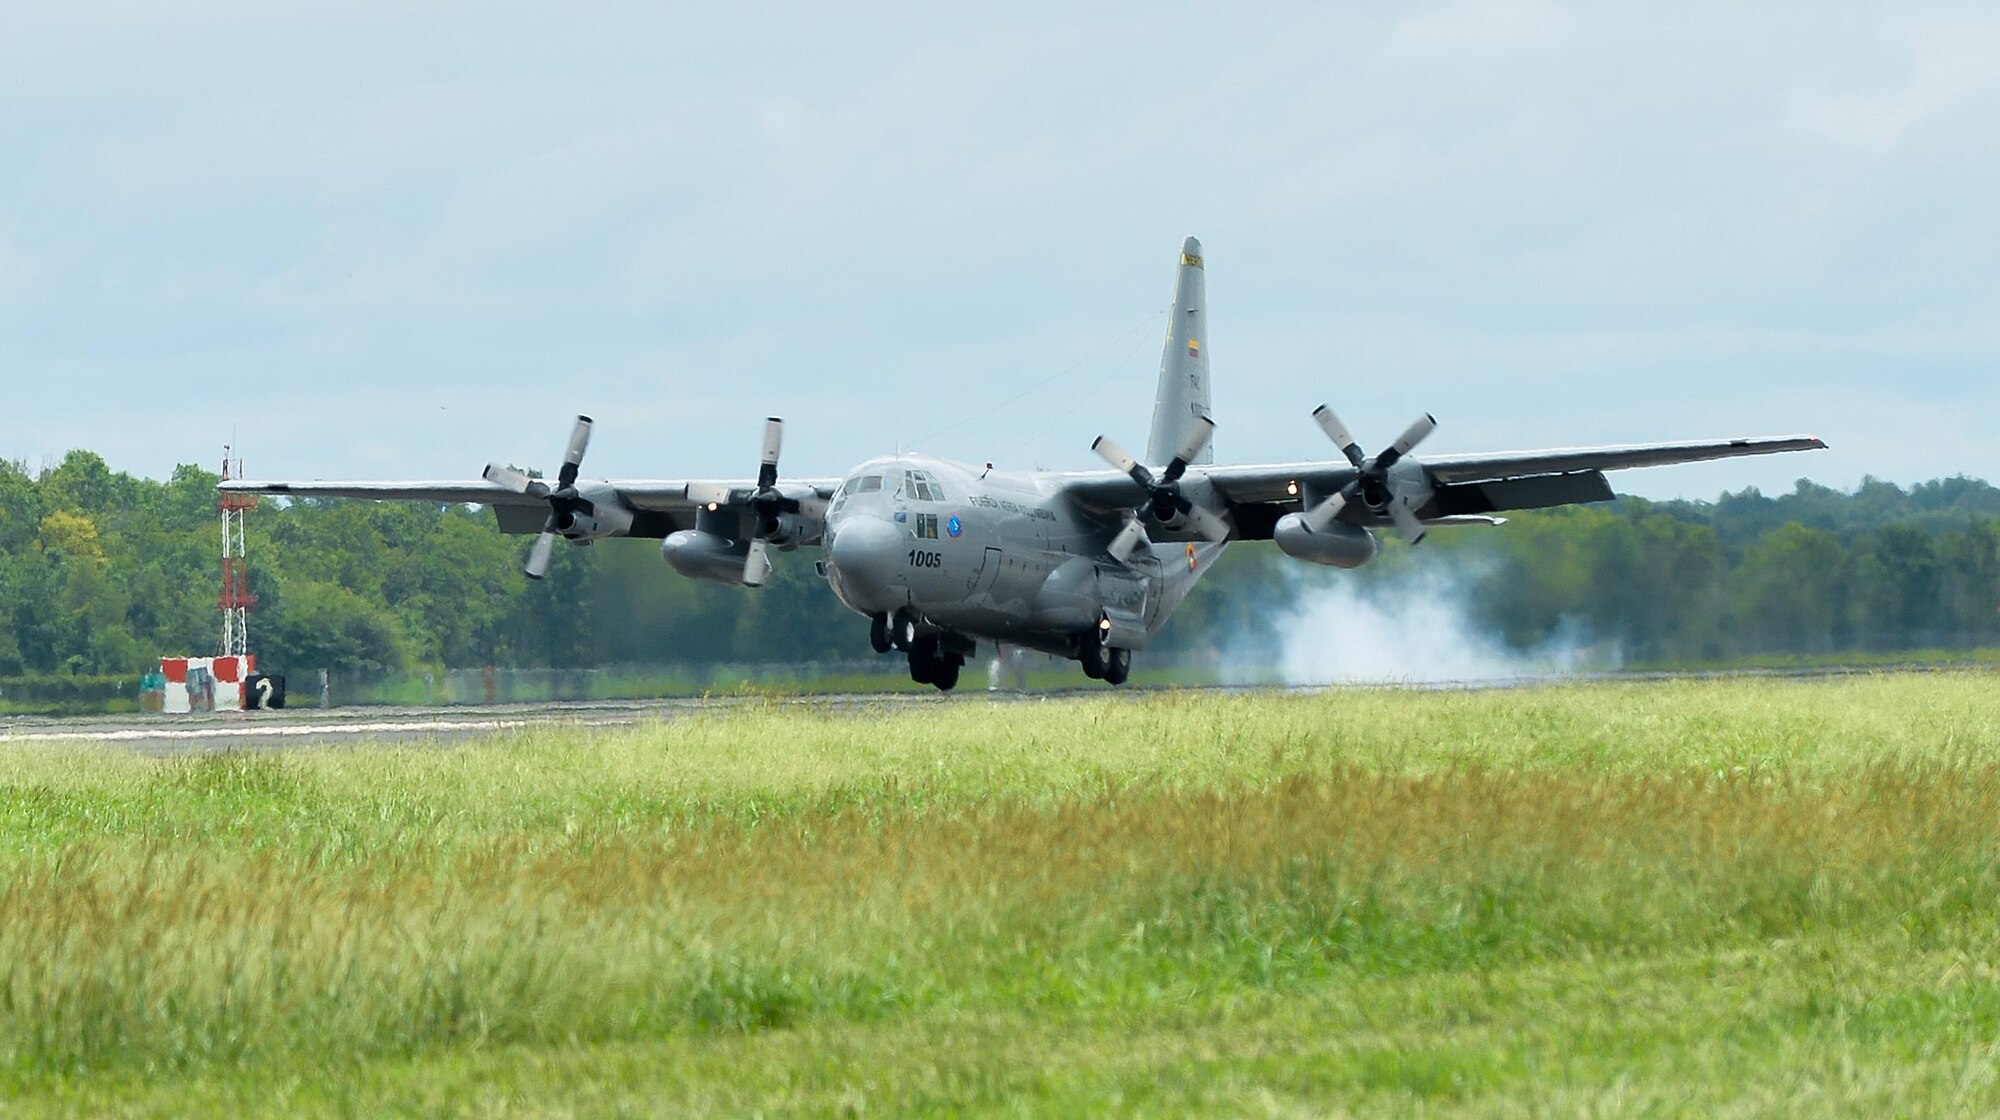 A Colombian Air Force C-130 Hercules lands at Barksdale Air Force Base, La., Aug. 13, 2016. The Colombian Air Force brought about 45 Airmen and four A-29B Super Tucanos to Barksdale to participate in Exercise Green Flag East Aug. 15-29. (U.S. Air Force photo/Senior Airman Mozer O. Da Cunha)